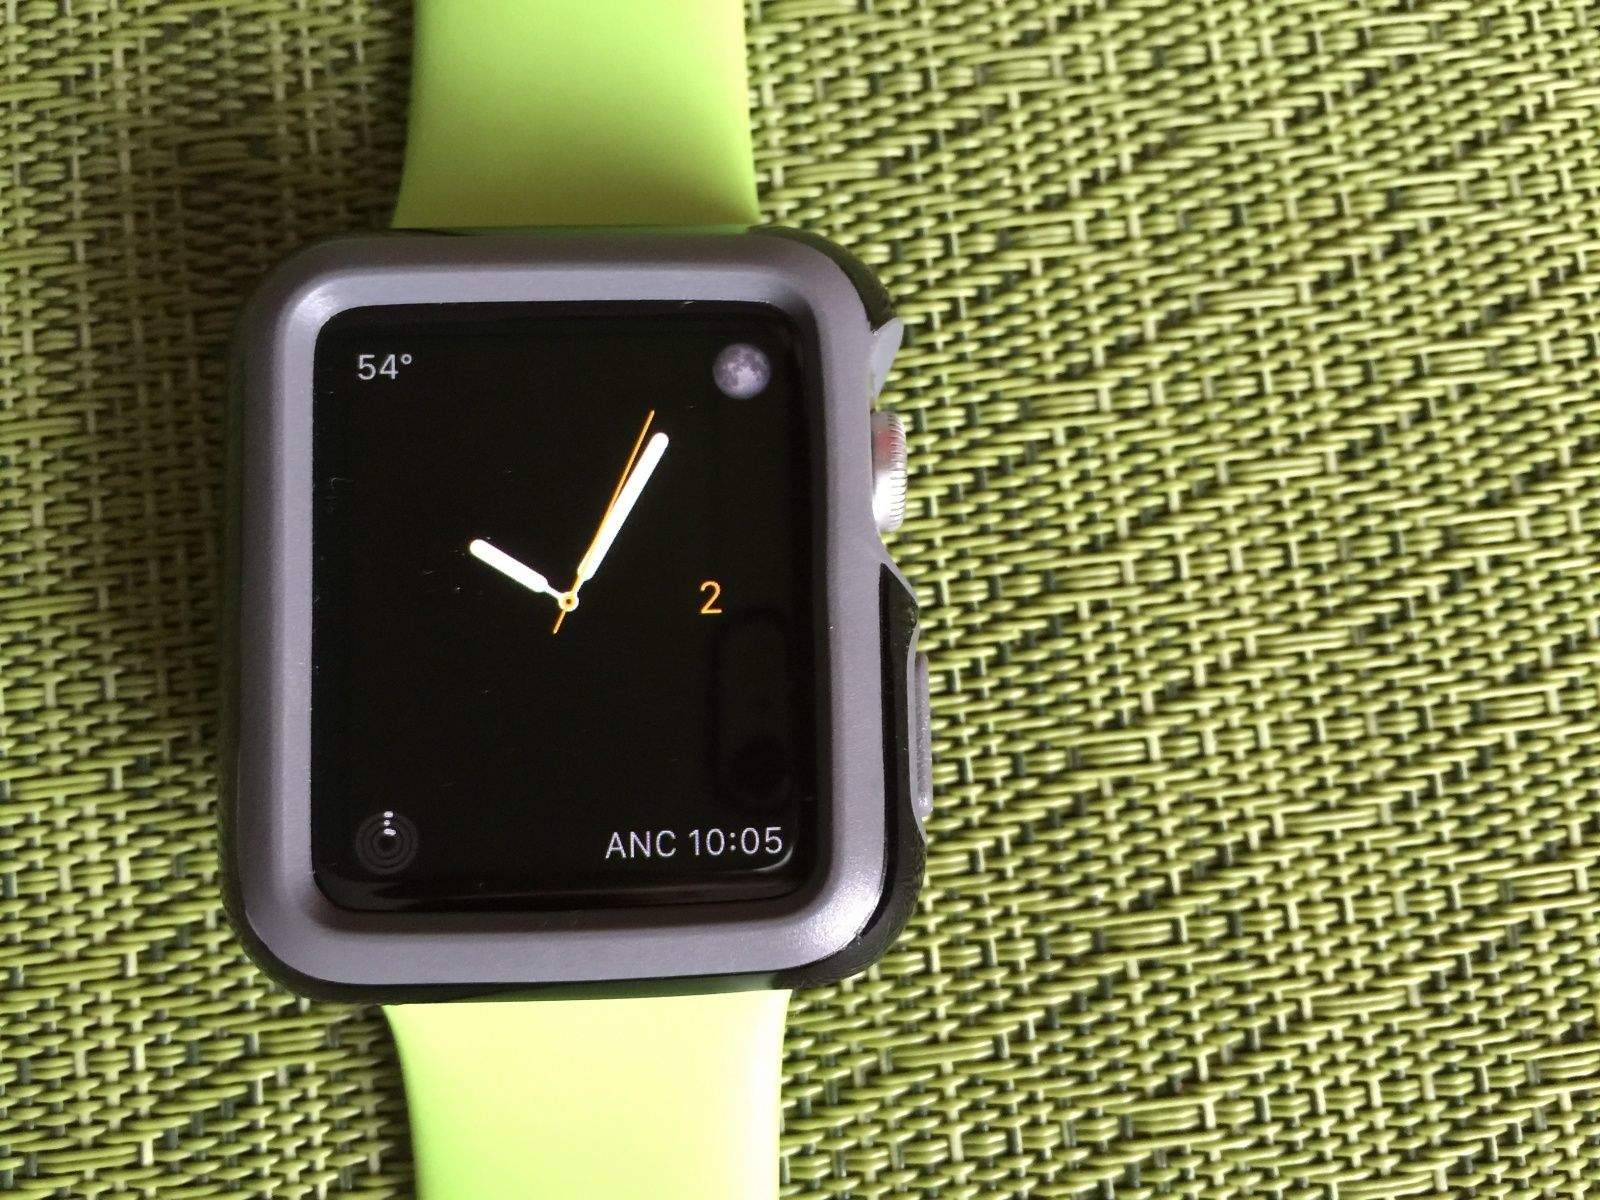 Do you really need that much protection for your Apple Watch?